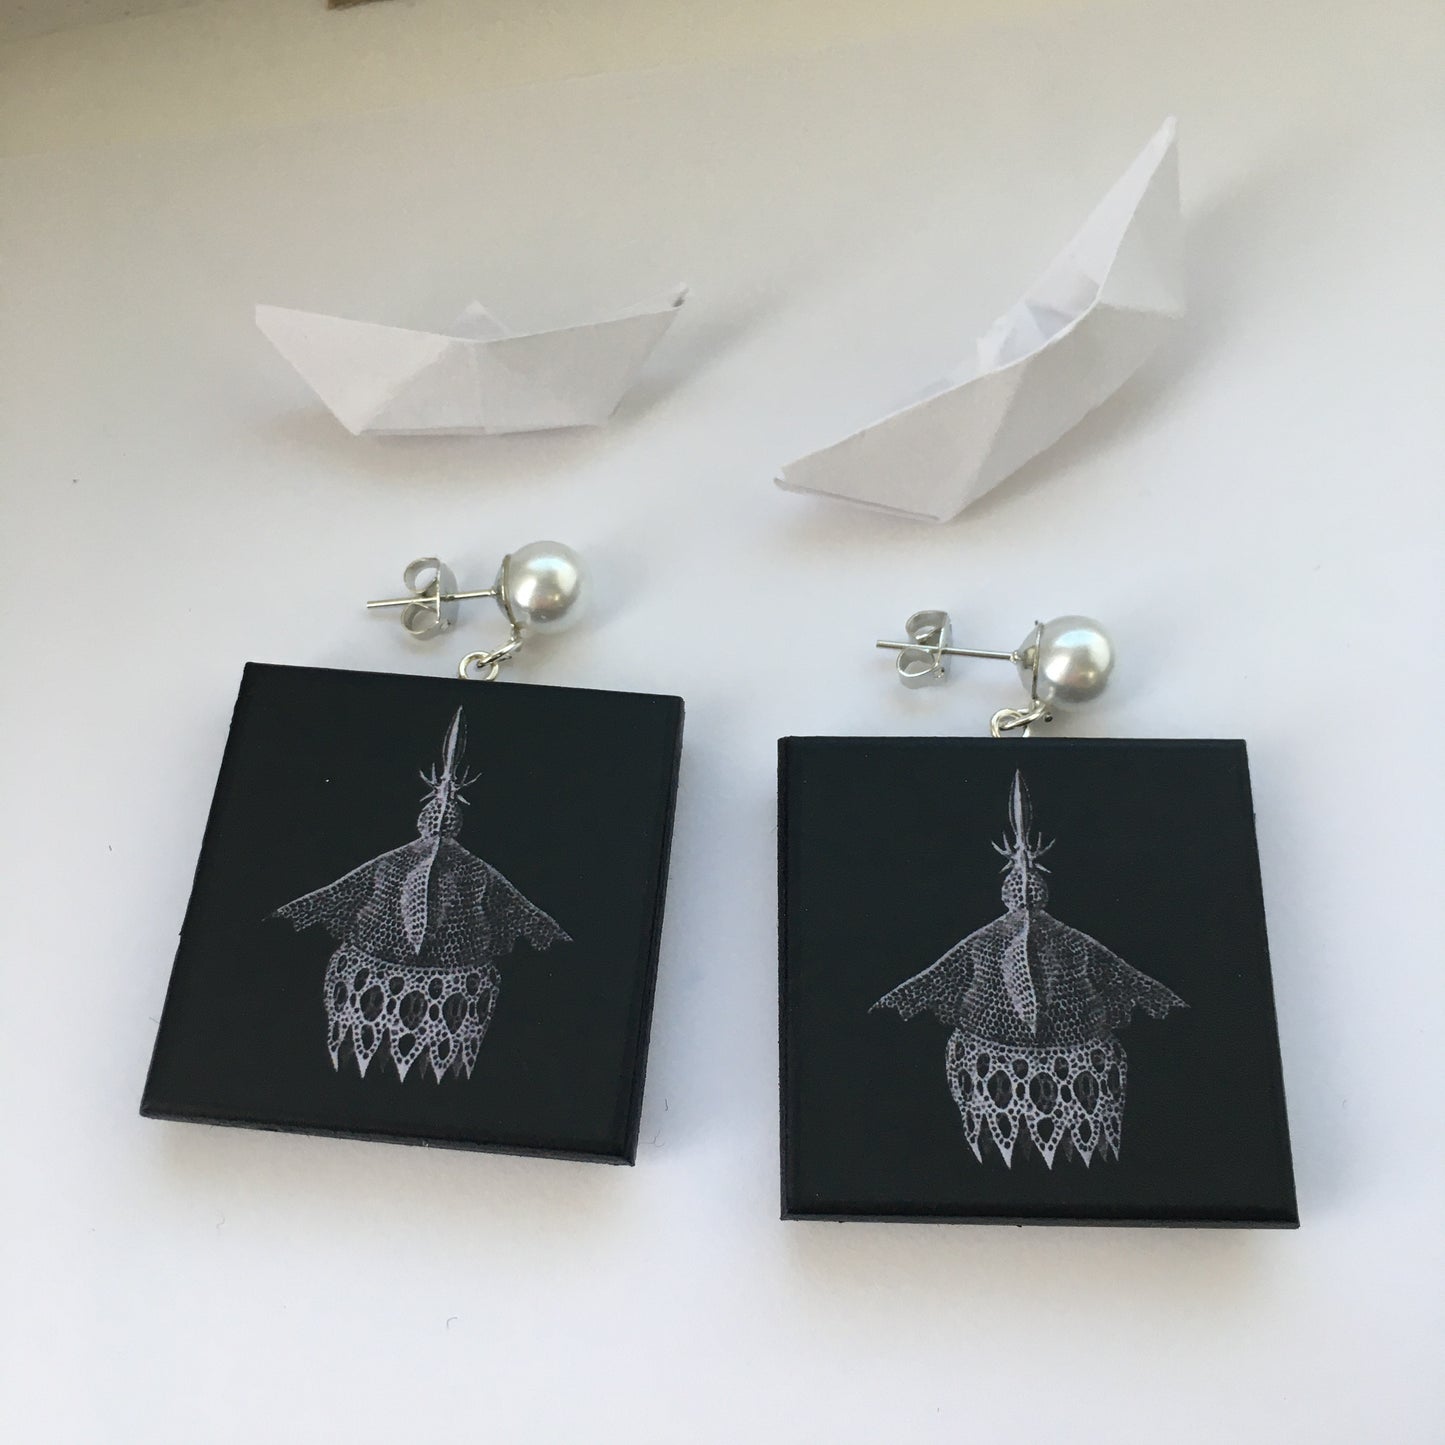 Sustainable wood earrings with stud pearls inspired by Ernst Haeckel marine shells, radiolaria black and white illustration. These earrings are completely handmade by Obljewellery